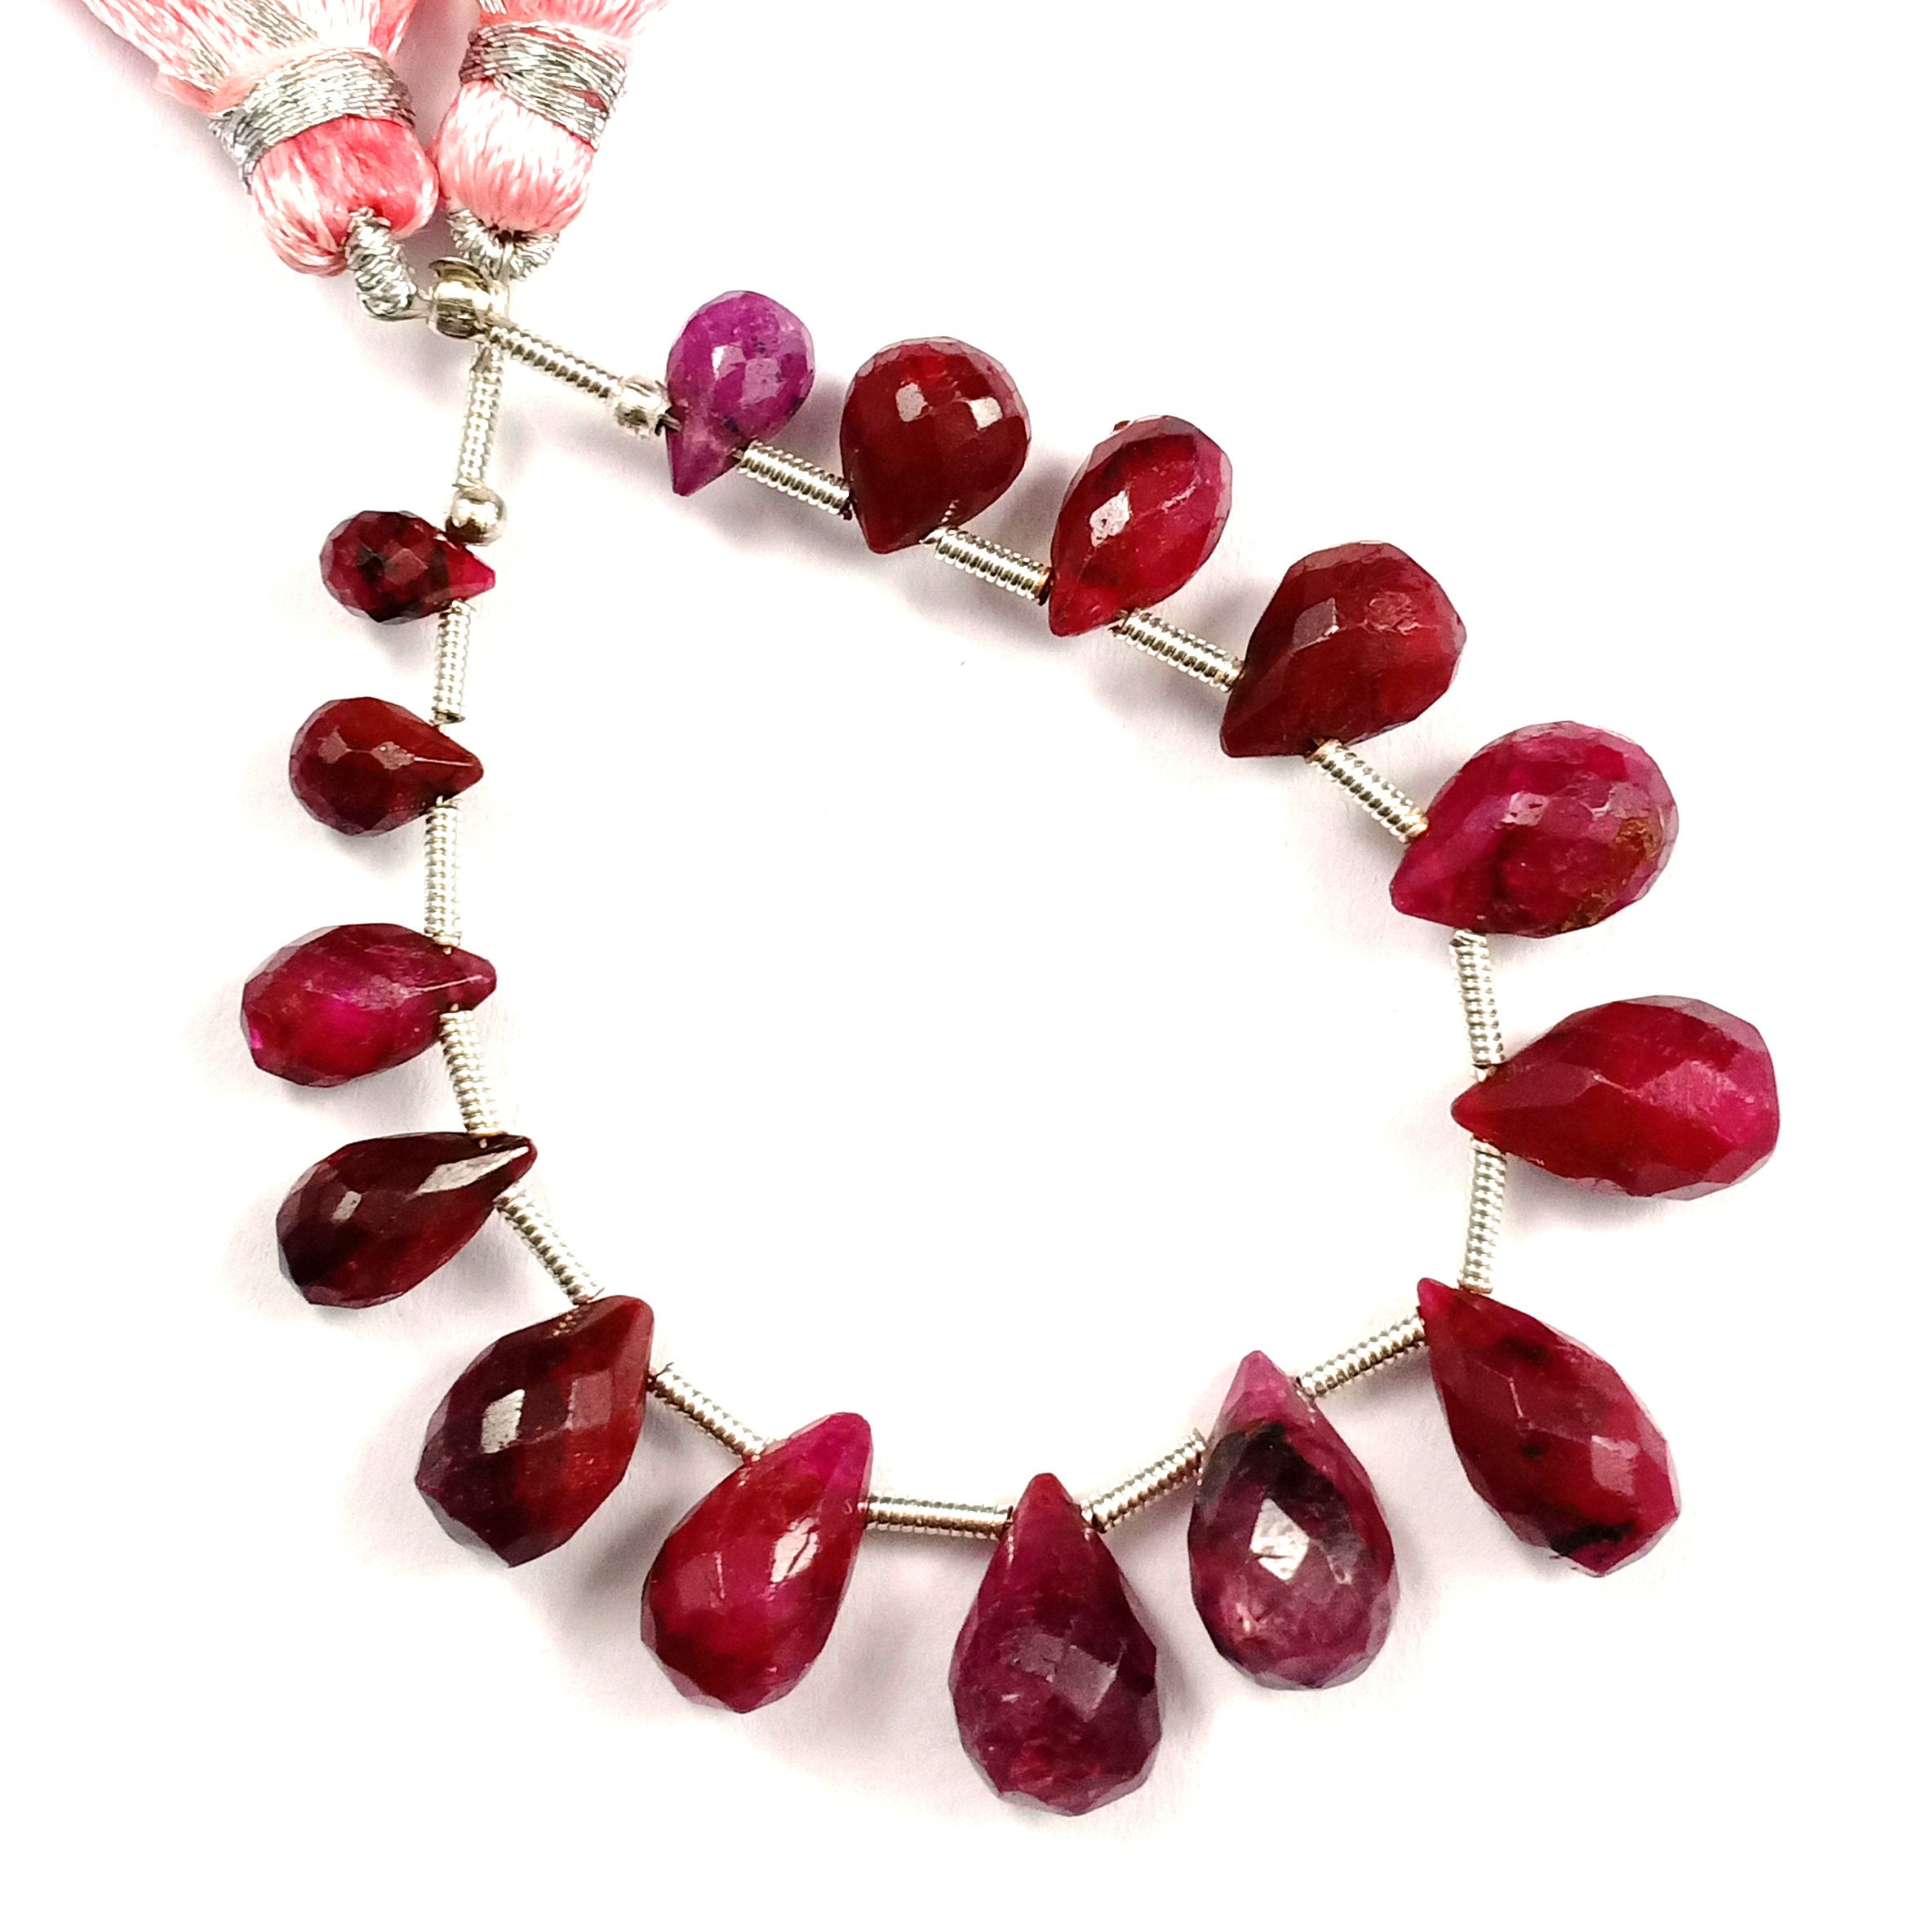 Dazzling Ruby GemstoneCushion Shape Ruby Faceted BeadsRuby Beads8''Inch Ruby 1 StrandRuby Briolette BeadsFor Making JewelryB-684